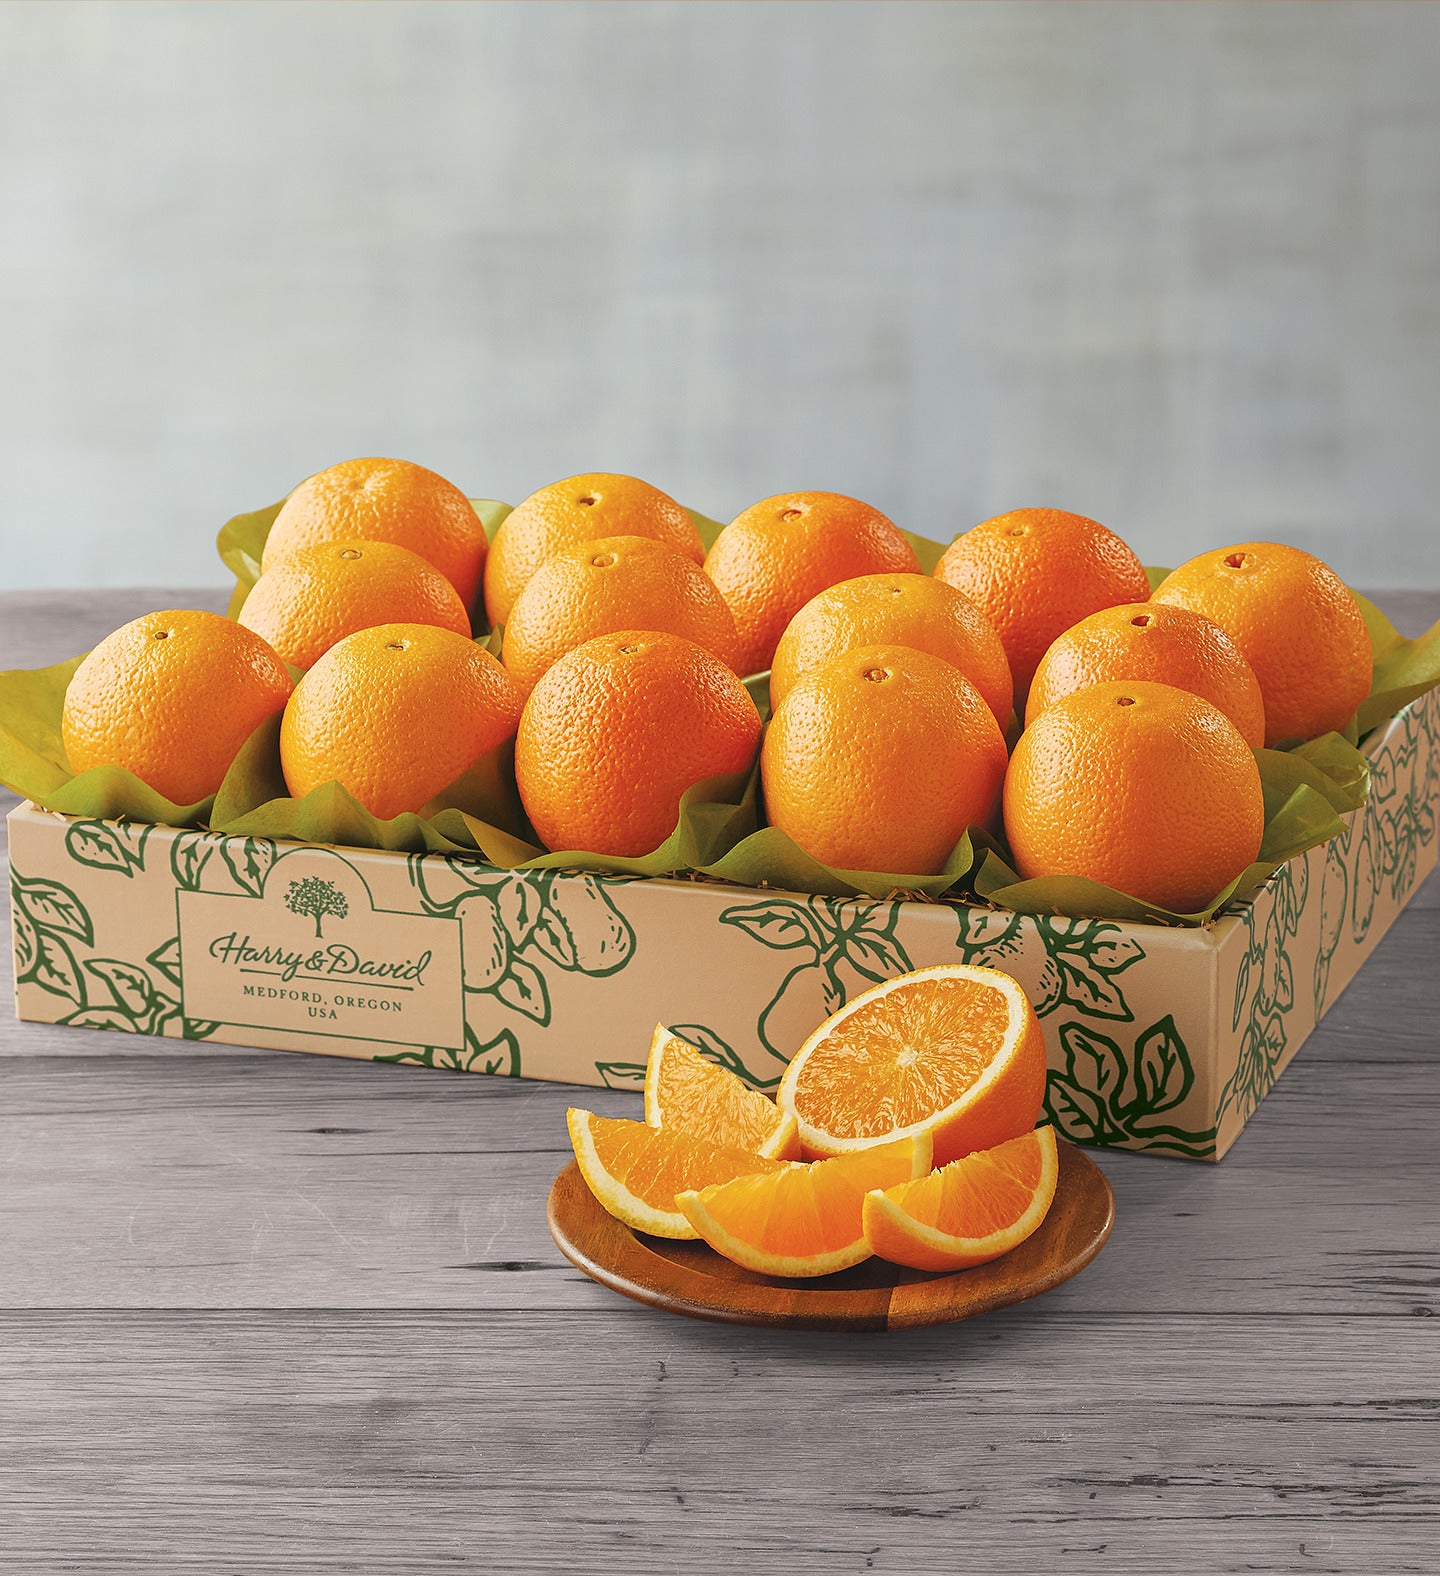 Should Oranges Be Refrigerated?